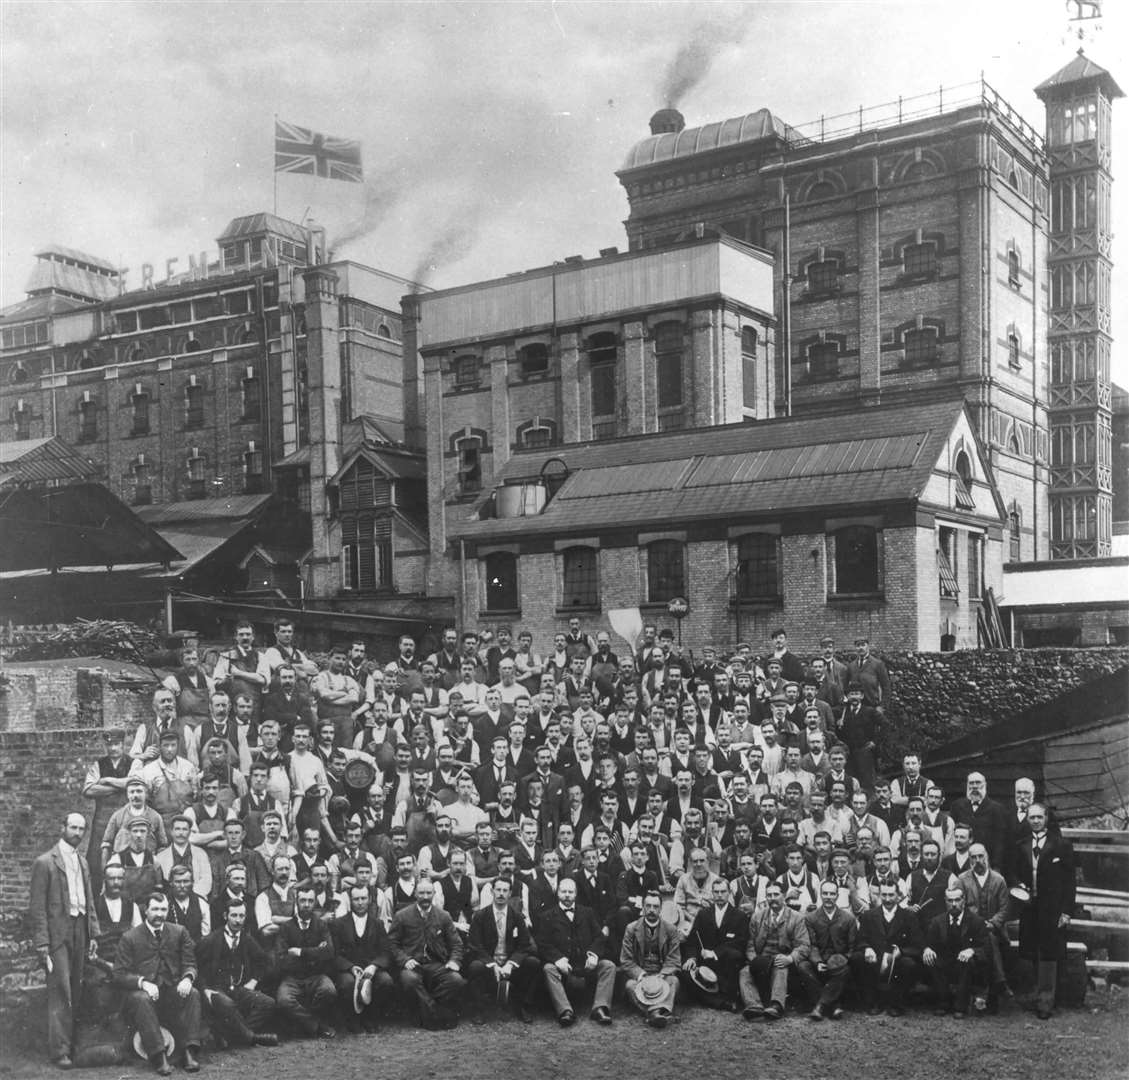 Workers of the old Fremlin’s Brewery in Maidstone in 1892